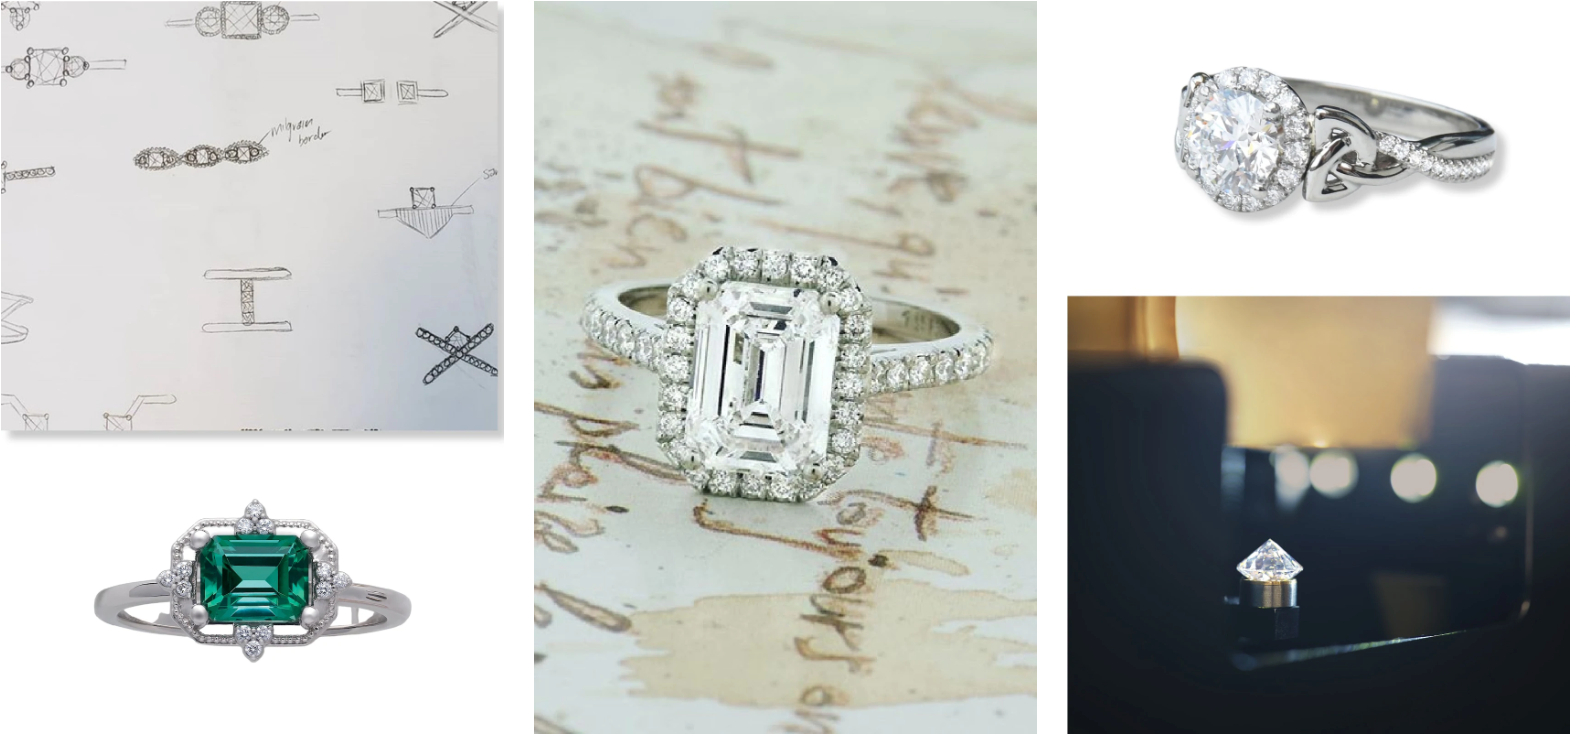 Collage of sketches of a to be custom diamond ring, a finalized custom green stone & lab-grown diamond ring, a custom ring with lab grown princess cut diamond with numerous other diamonds, round cut lab grown diamond ring, & a large diamond on a table.